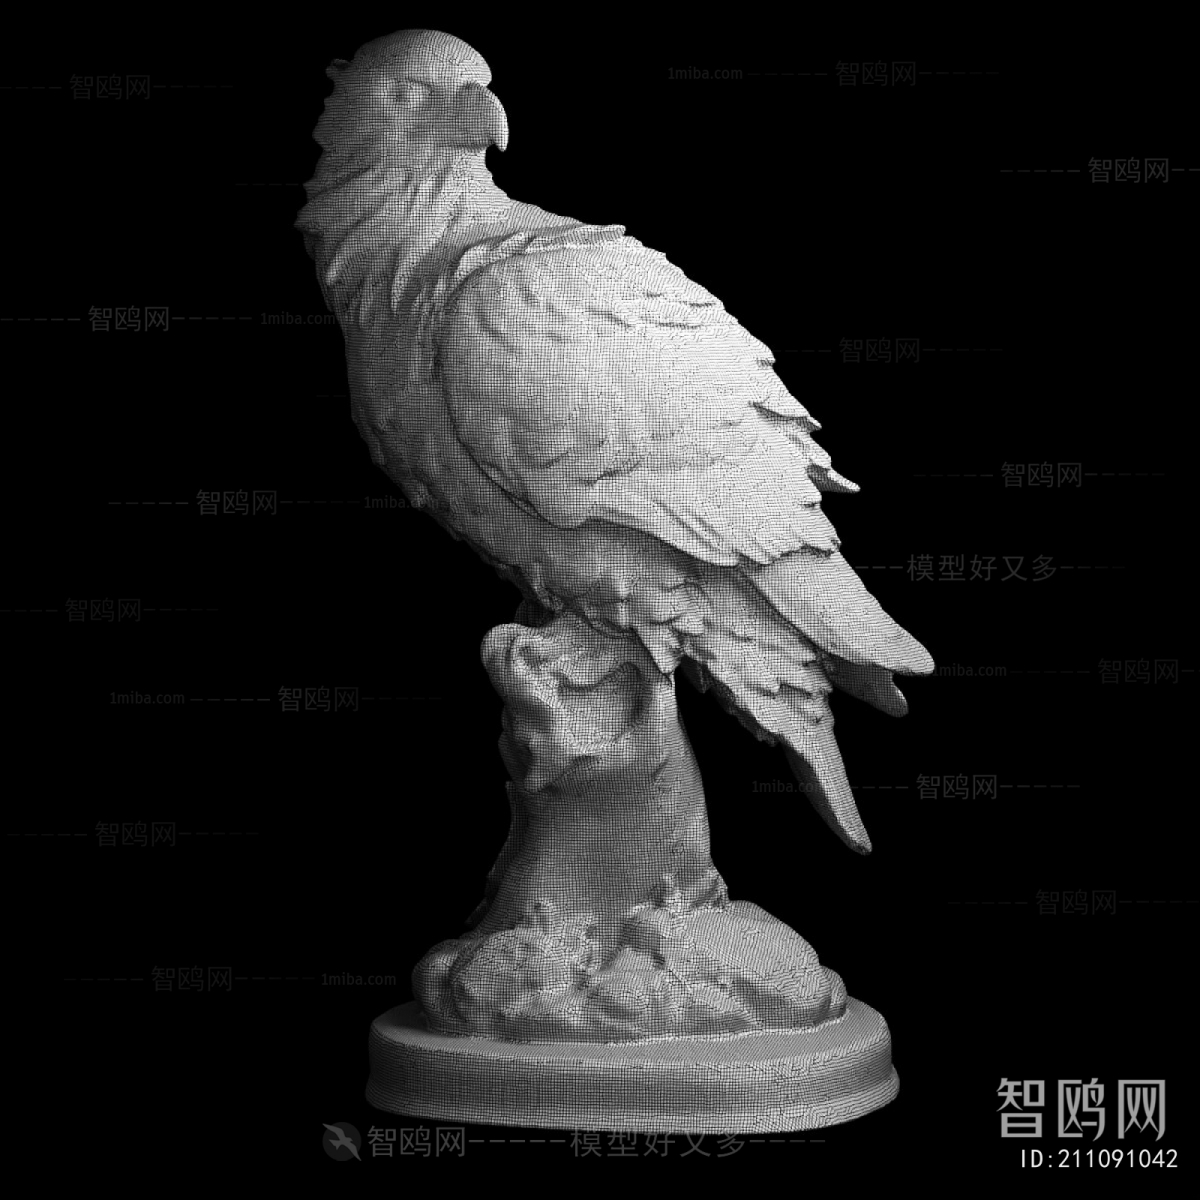 New Chinese Style Sculpture